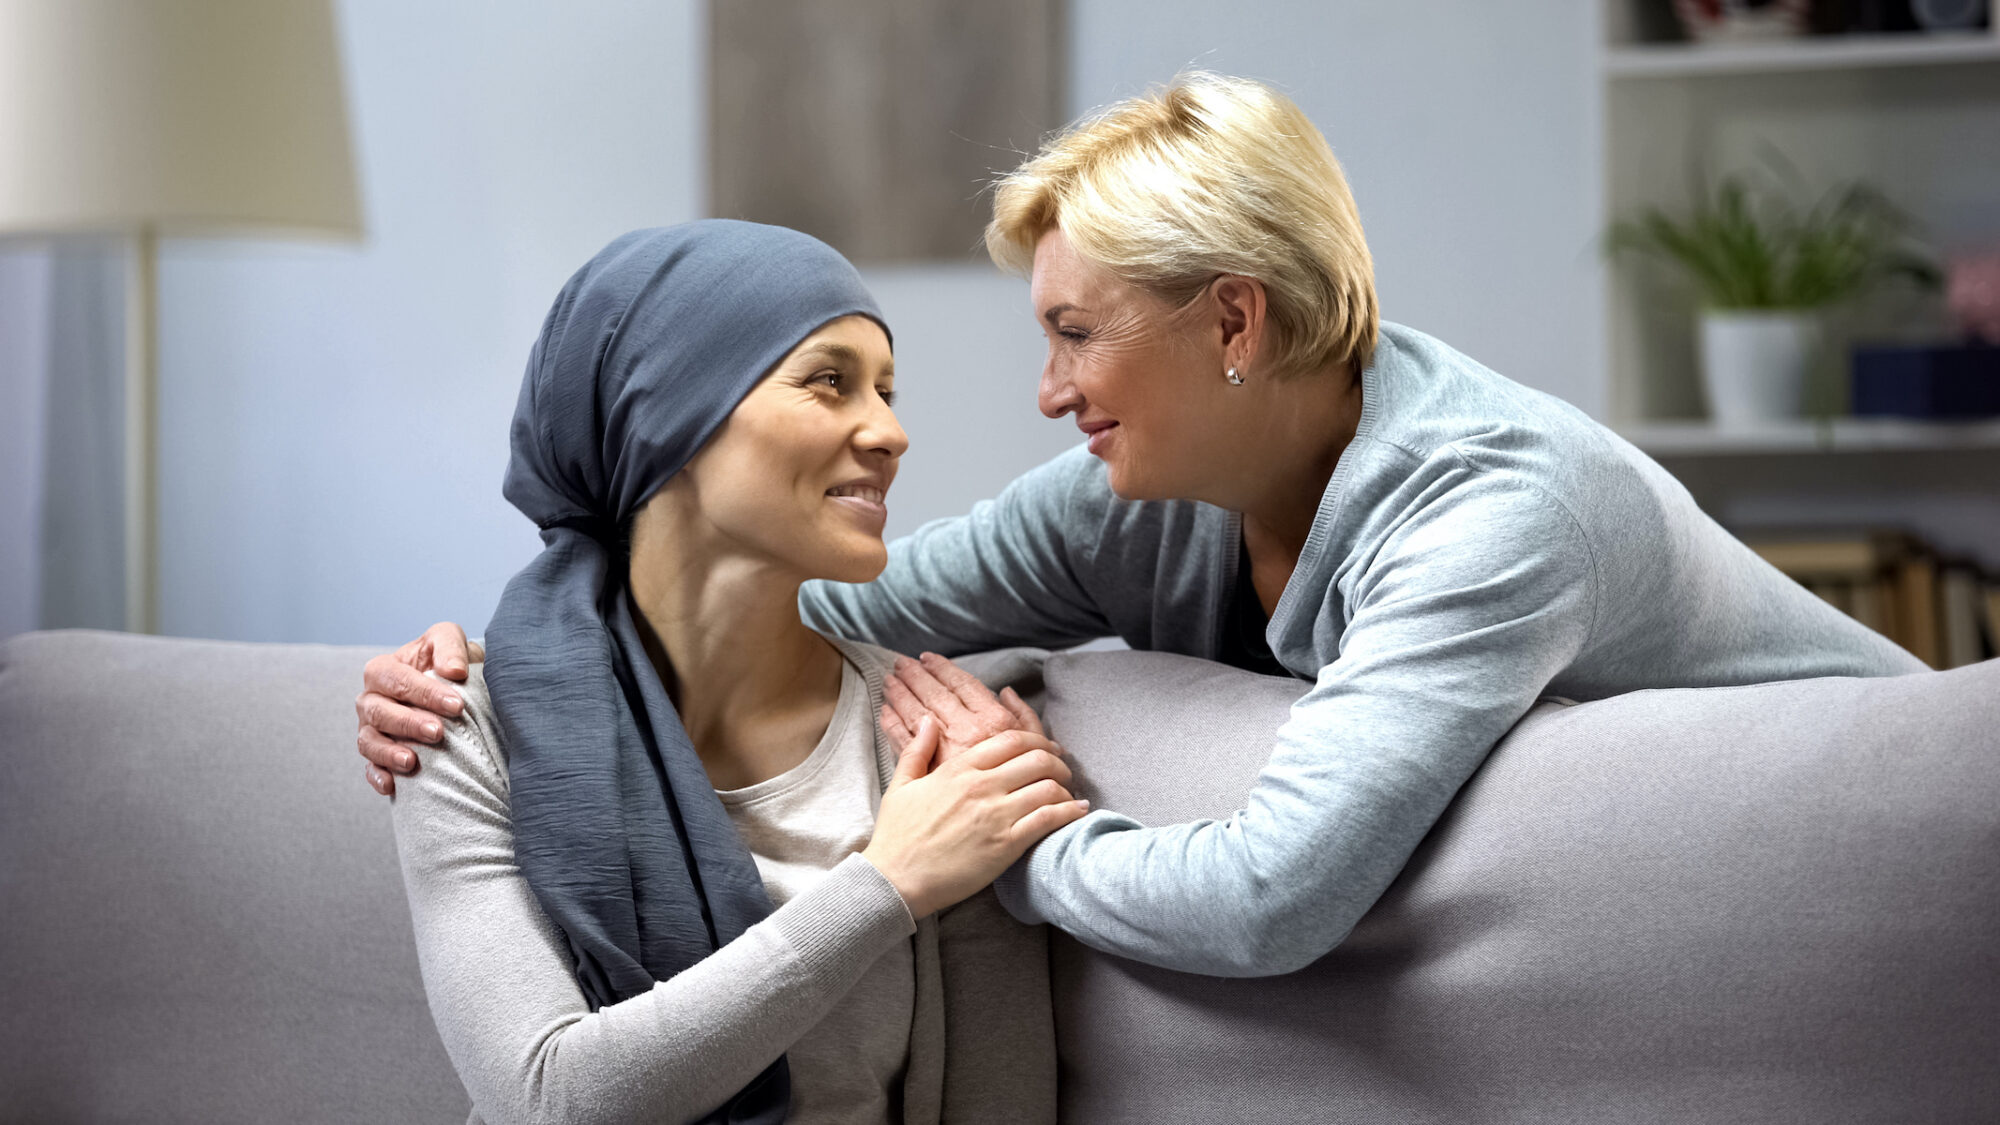 Woman comforting woman with cancer | cCARE | CA